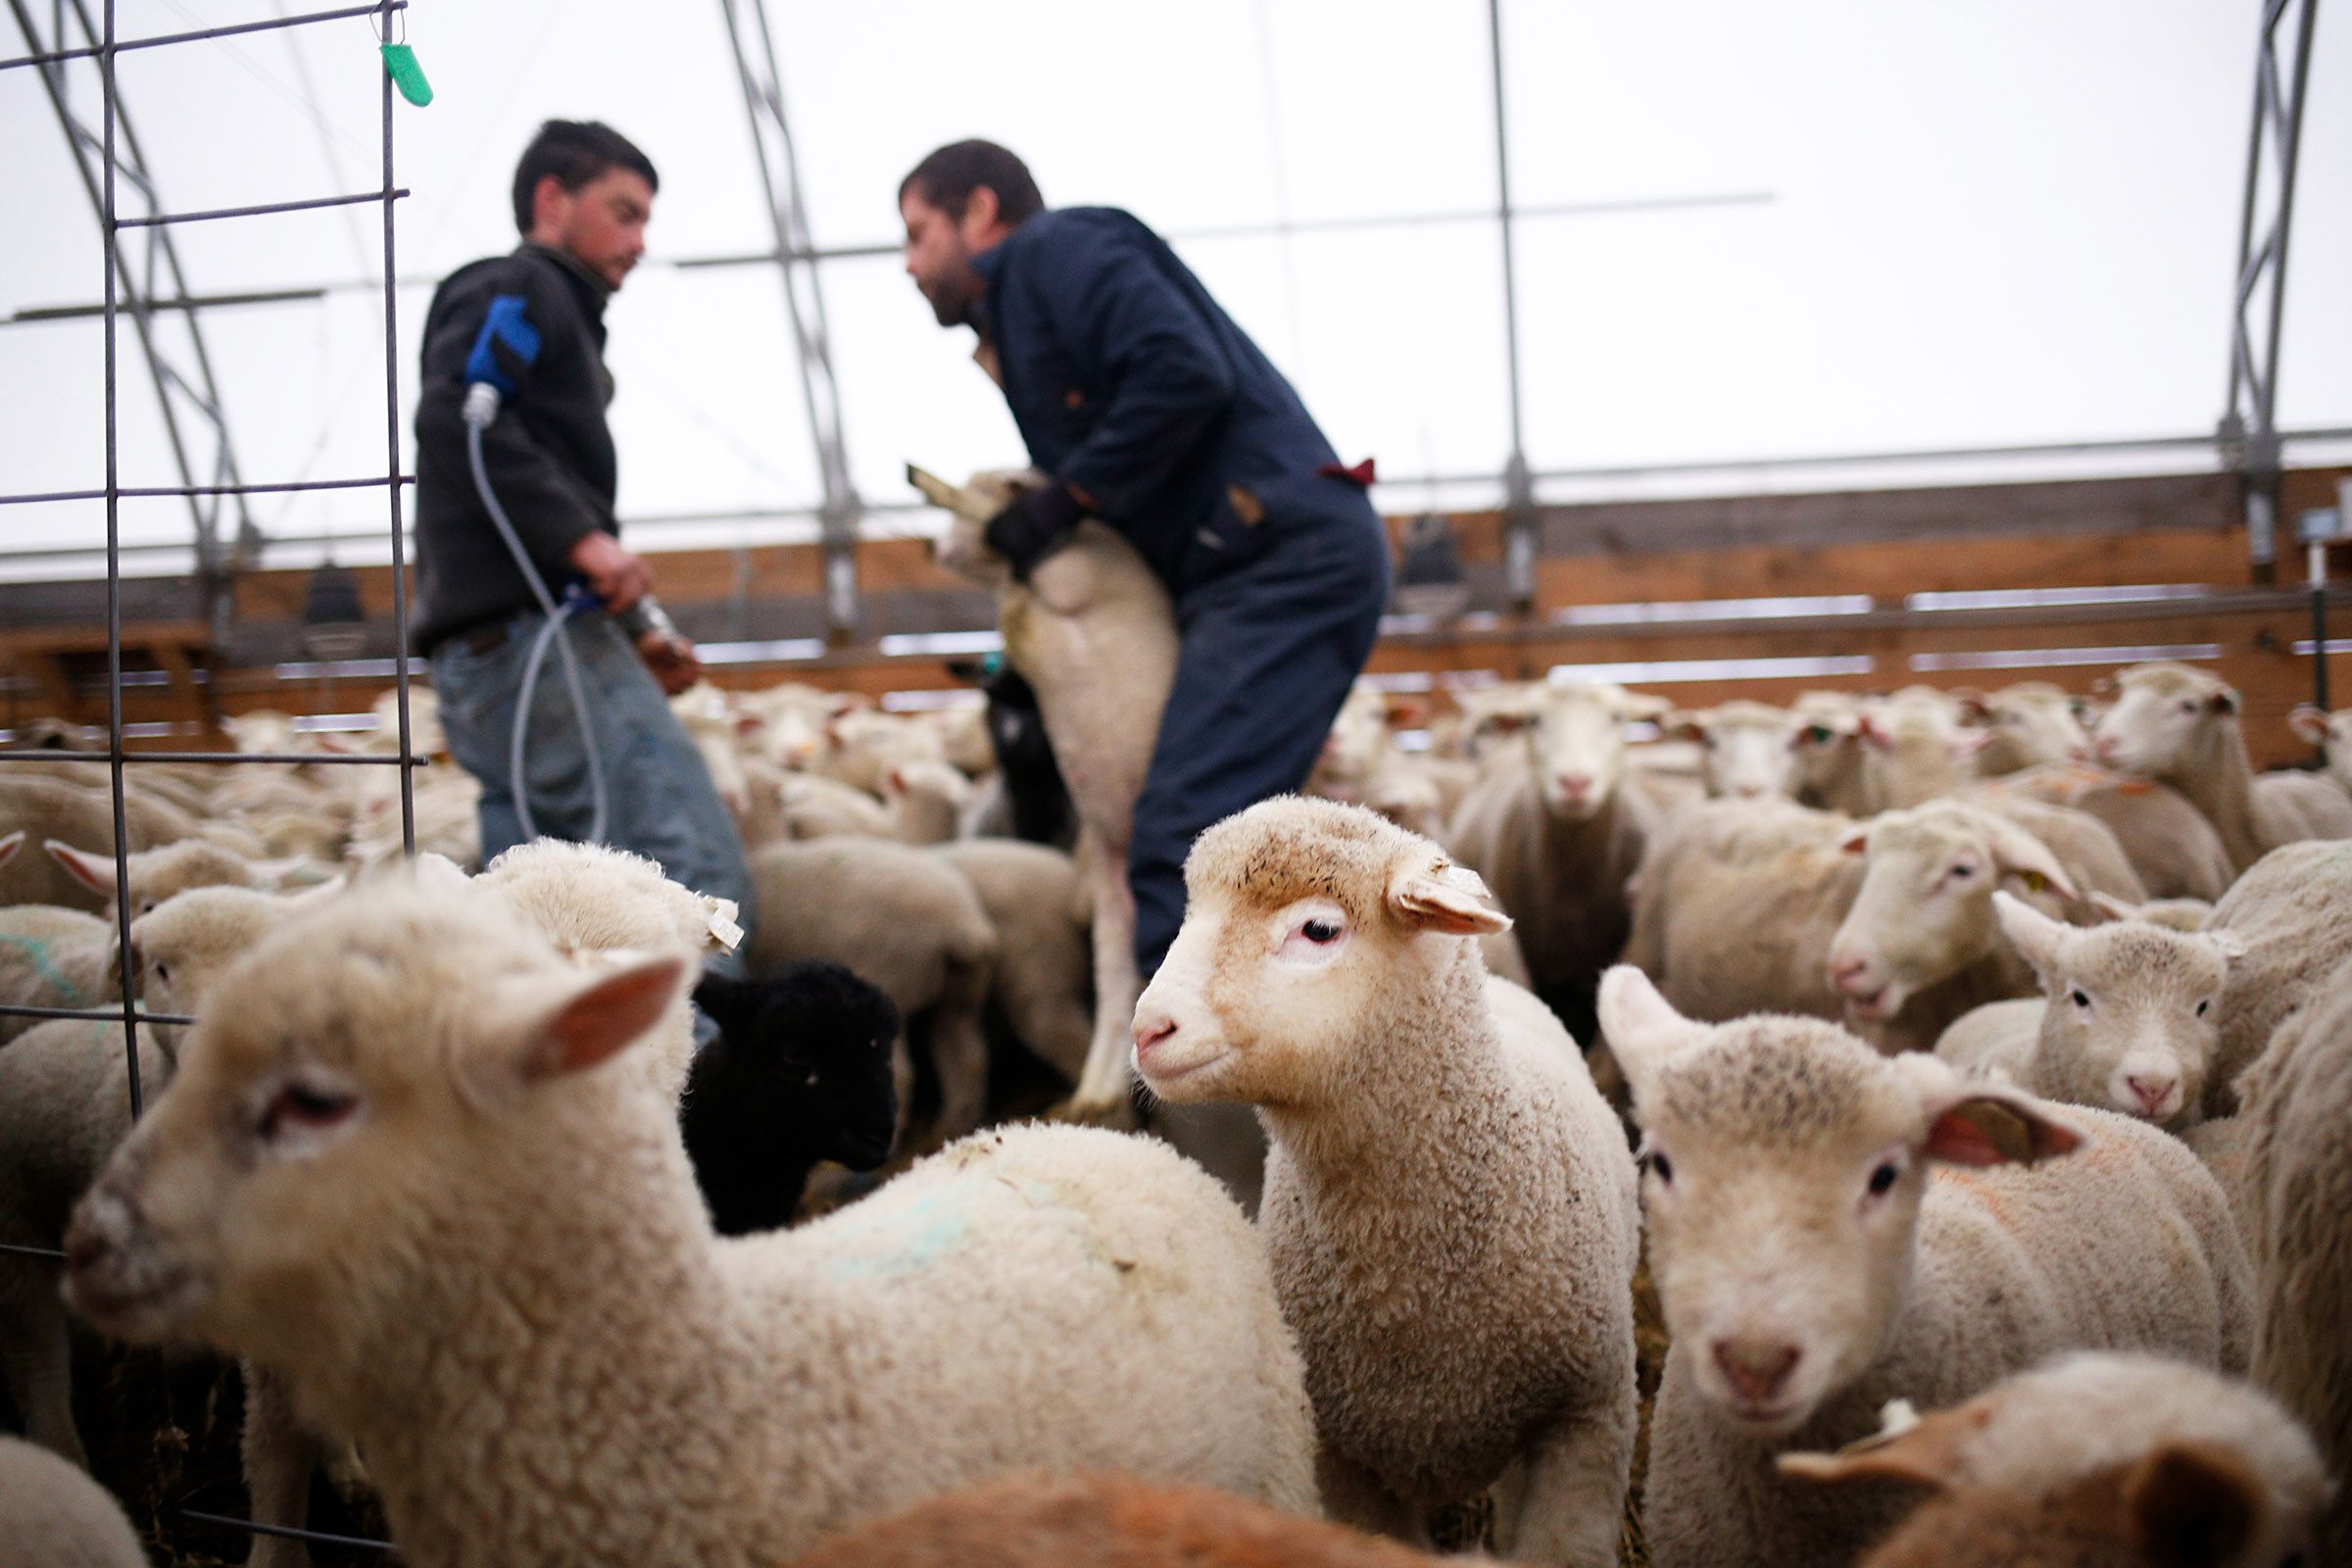 Animal manager Chris Bonasia, left, and owner Chuck Wooster vaccinate lambs against tetanus and other bacterial infections at Sunrise Farm in White River Junction, Vt., on Monday, April 8, 2019. Bonasia administered the injection and Wooster marked the lamb with colored chalk. (Valley News - Joseph Ressler) Copyright Valley News. May not be reprinted or used online without permission. Send requests to permission@vnews.com.